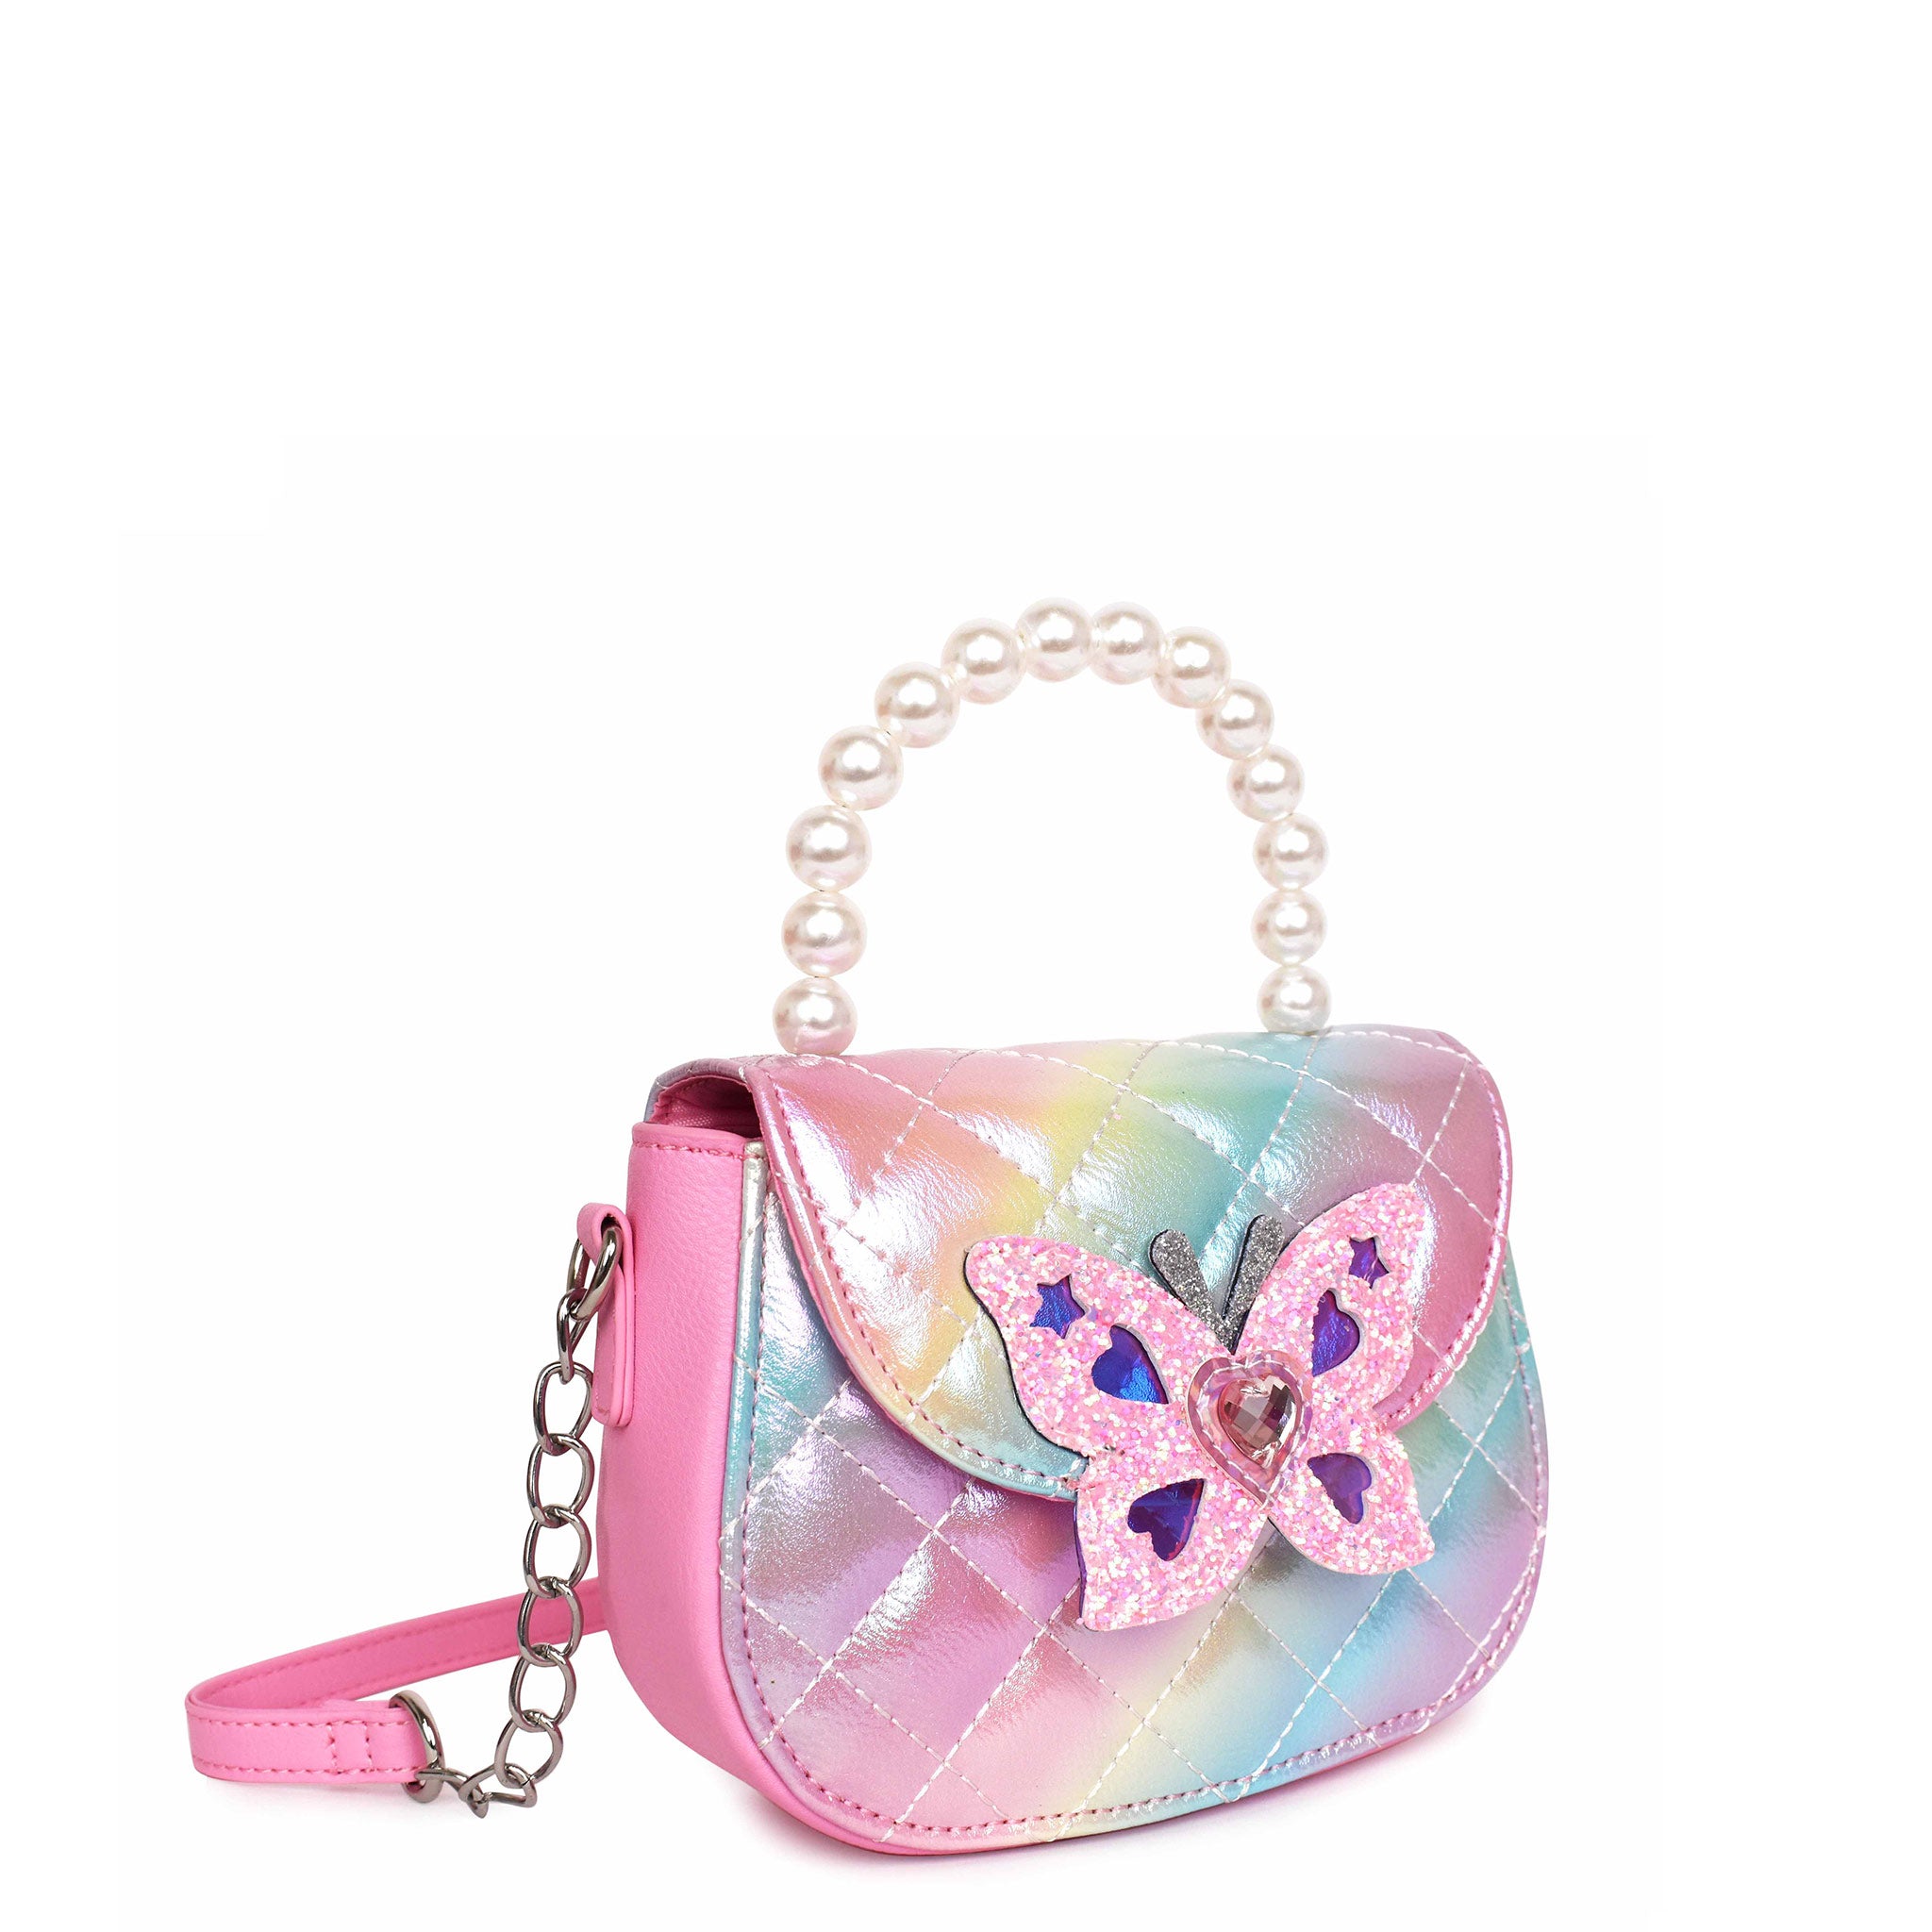 Side view of a metallic ombre quilted crossbody bag. Glitter butterfly closure button and pearl top handle.